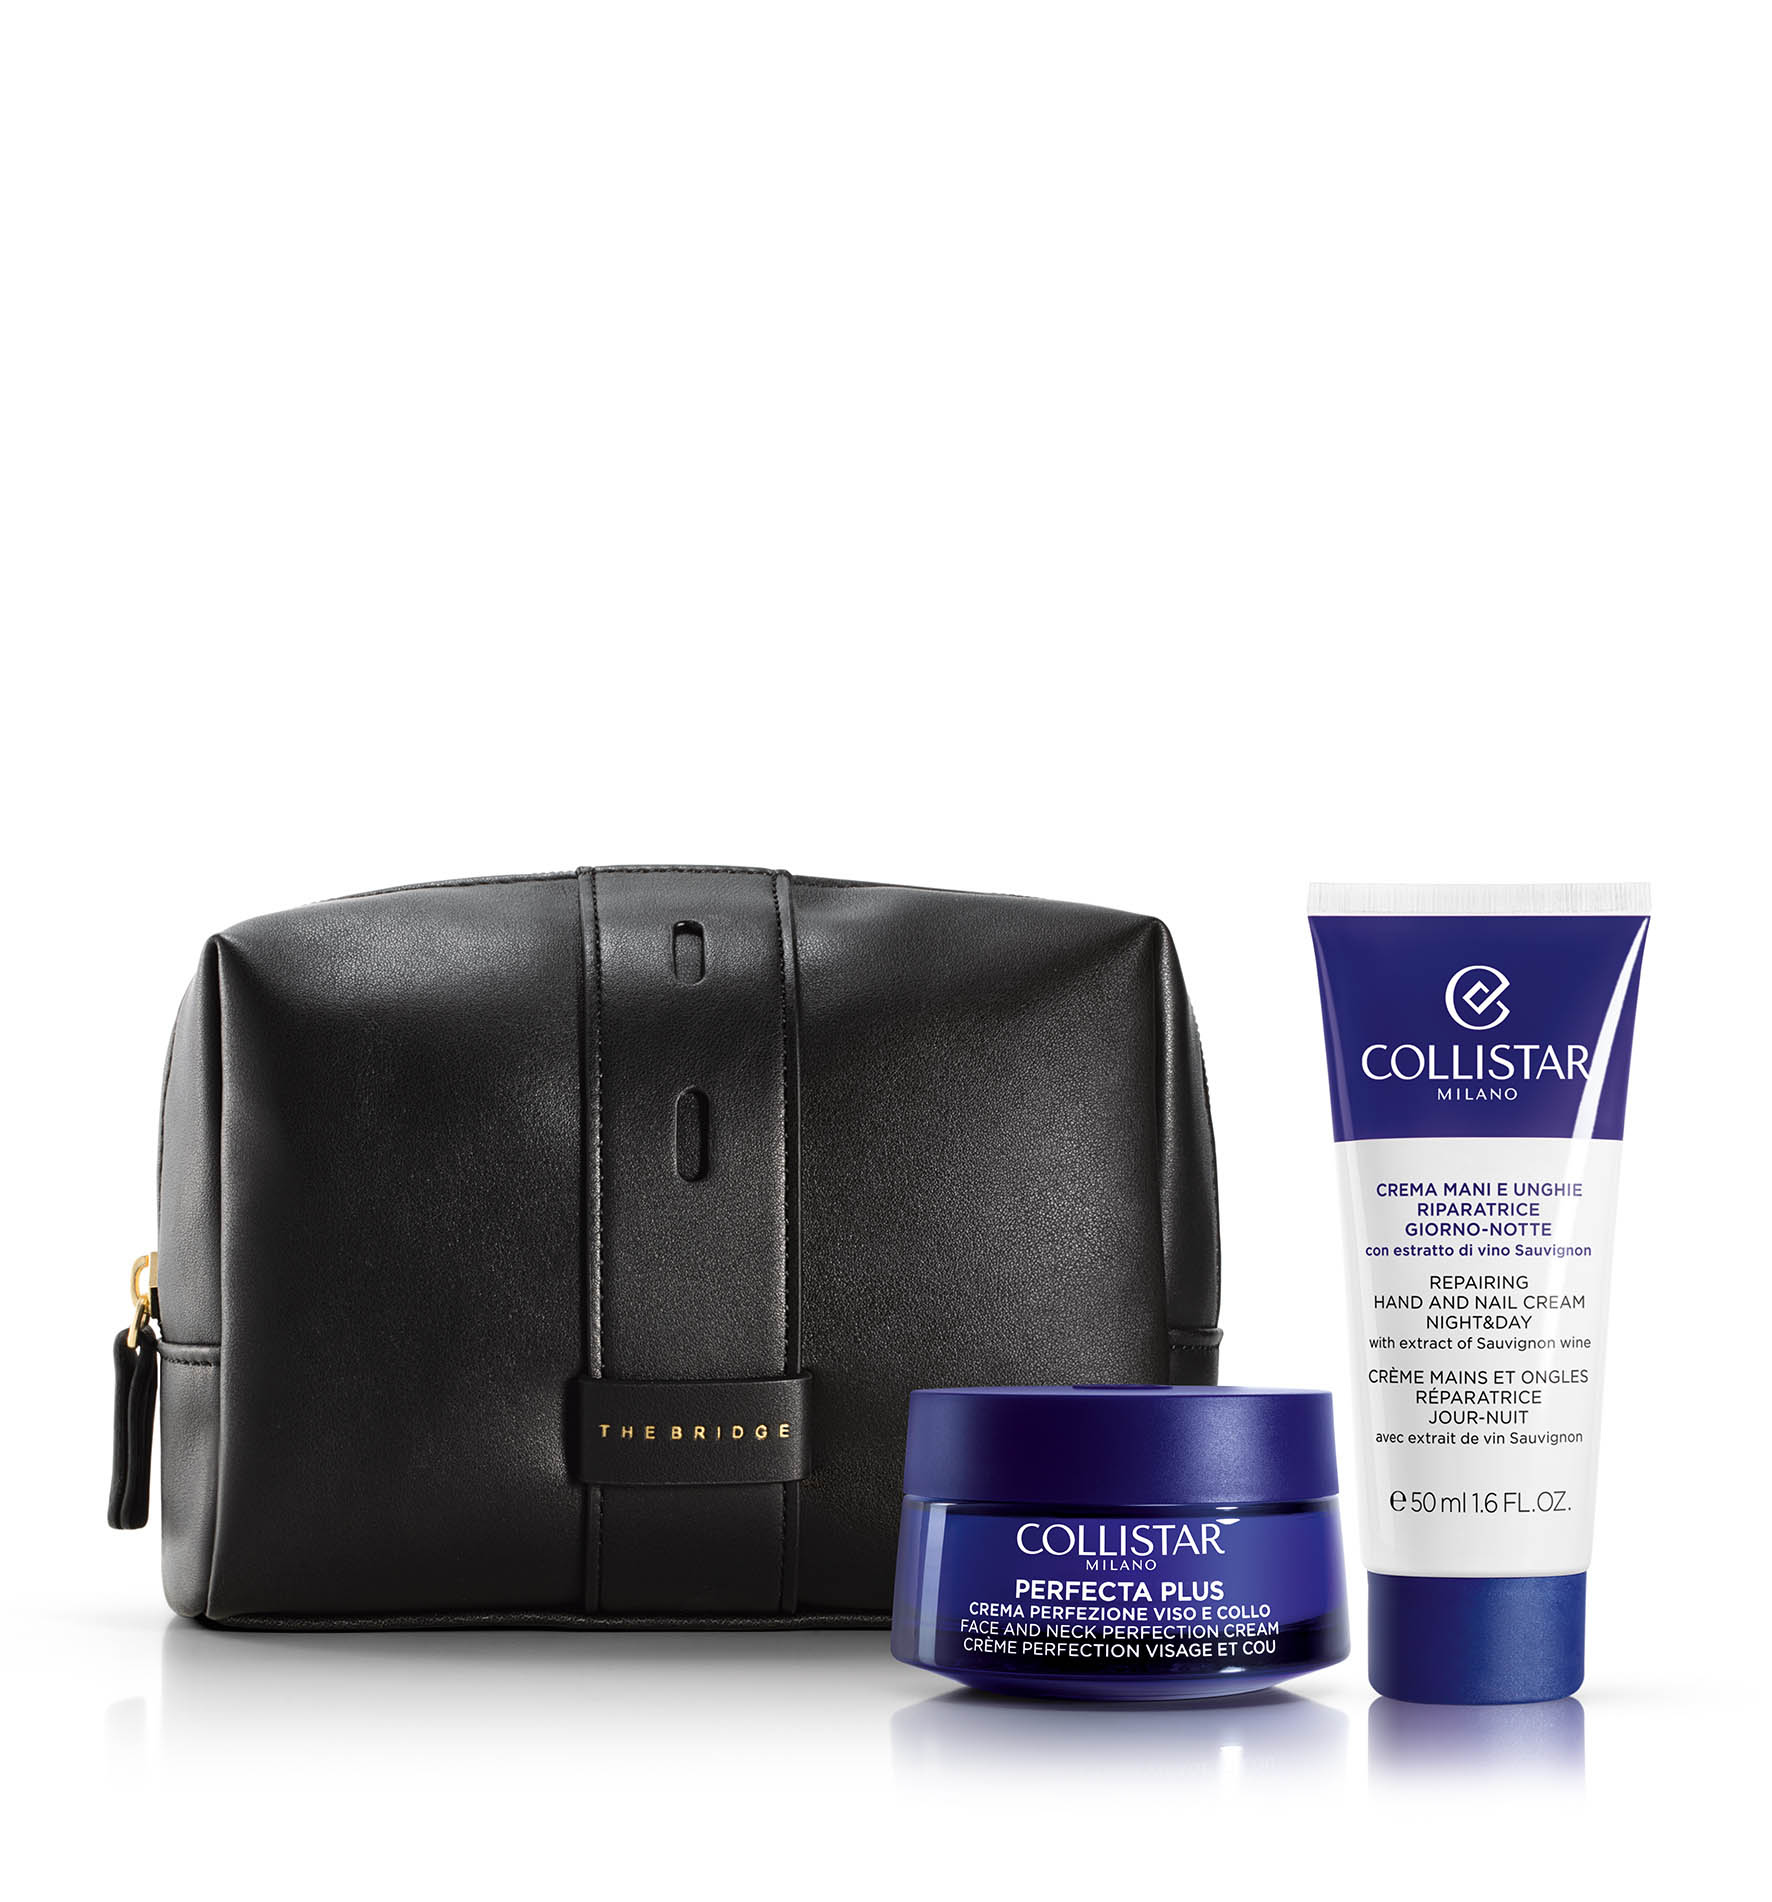 PERFECTA PLUS FACE AND NECK PERFECTION CREAM SET - New | Collistar - Shop Online Ufficiale